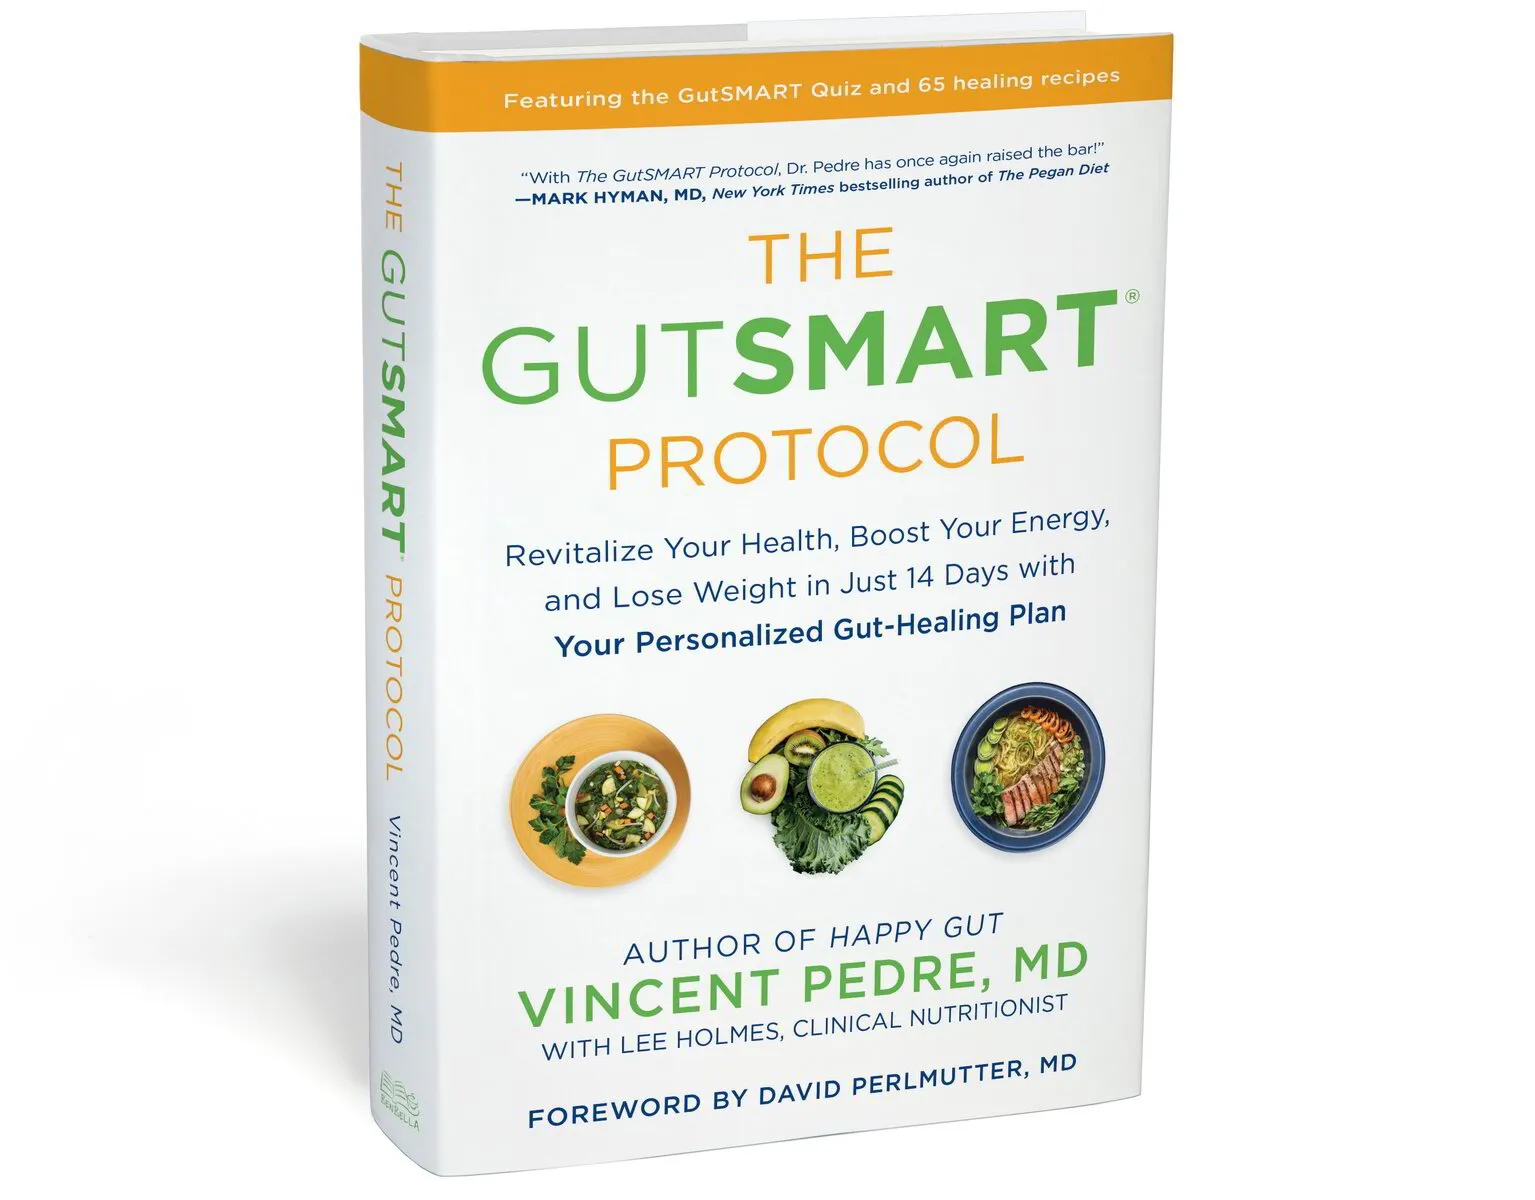 The GutSmart Protocol book cover by Vincent Pedre, MD, featuring health-related titles and food images.